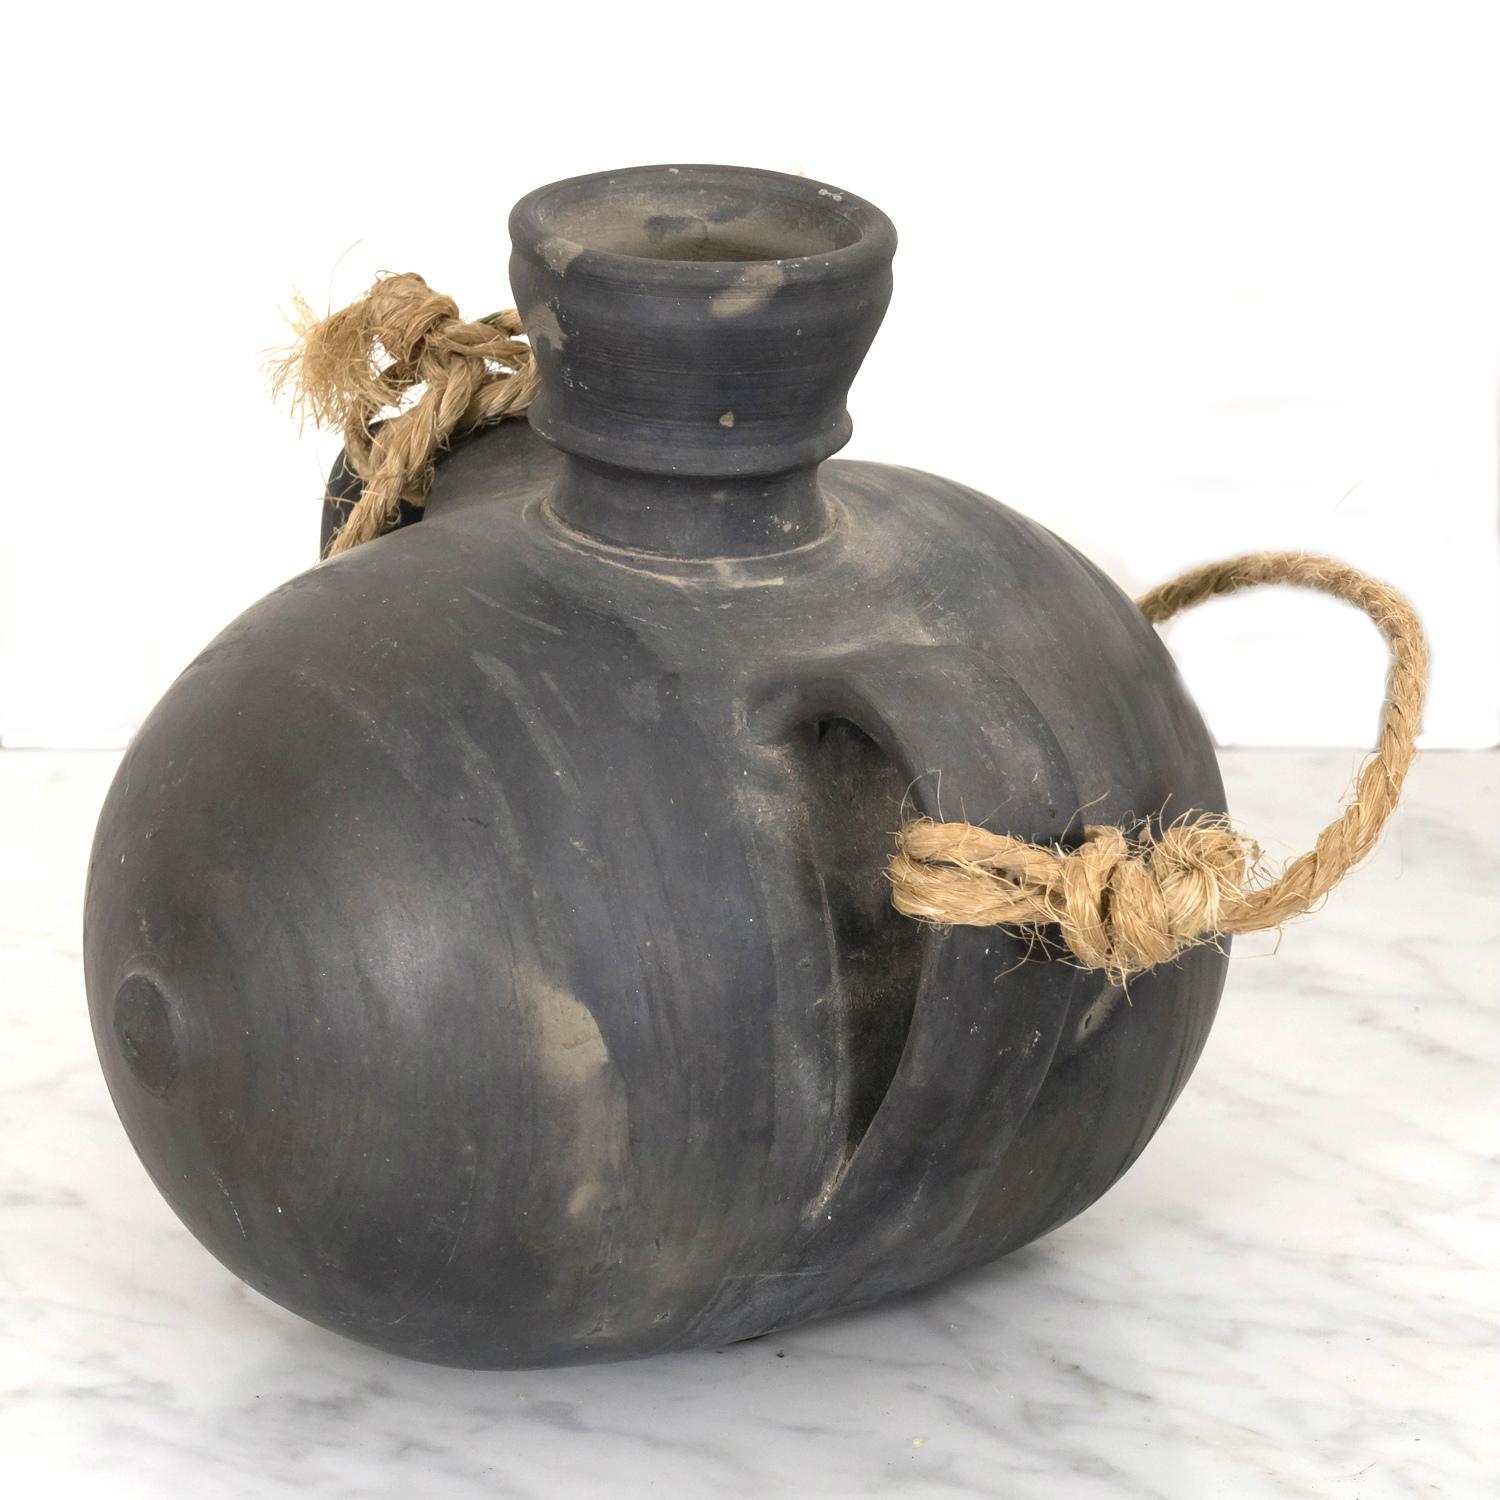 A signed 19th century barro negro or black clay tonel or barrel hand made in Miranda de Avilés in the Asturian area of ​​the Cantabrian coast of northern Spain, circa 1890s. This beautiful signed utilitarian pot, with its barrel shape, wide mouth,